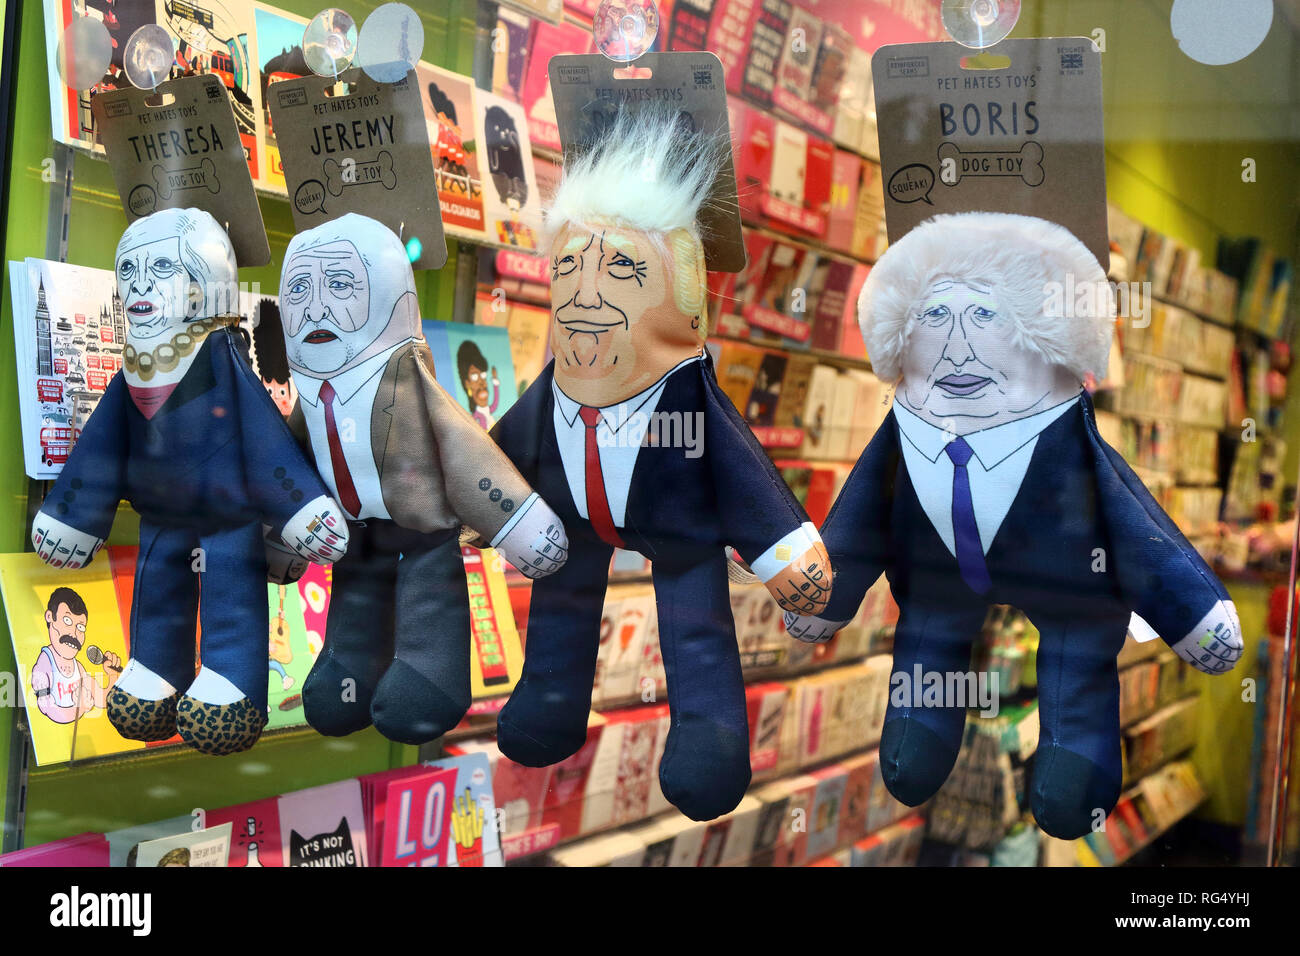 Humorous puppets of politicians are seen on sale at the London shop - Theresa May (UK Prime Minister), Jeremy Corbyn (Leader of UK Labour Party) Donald Trump (US President) and Boris Johnson (former UK Foreign Secretary and Pro Brexiteer) Stock Photo